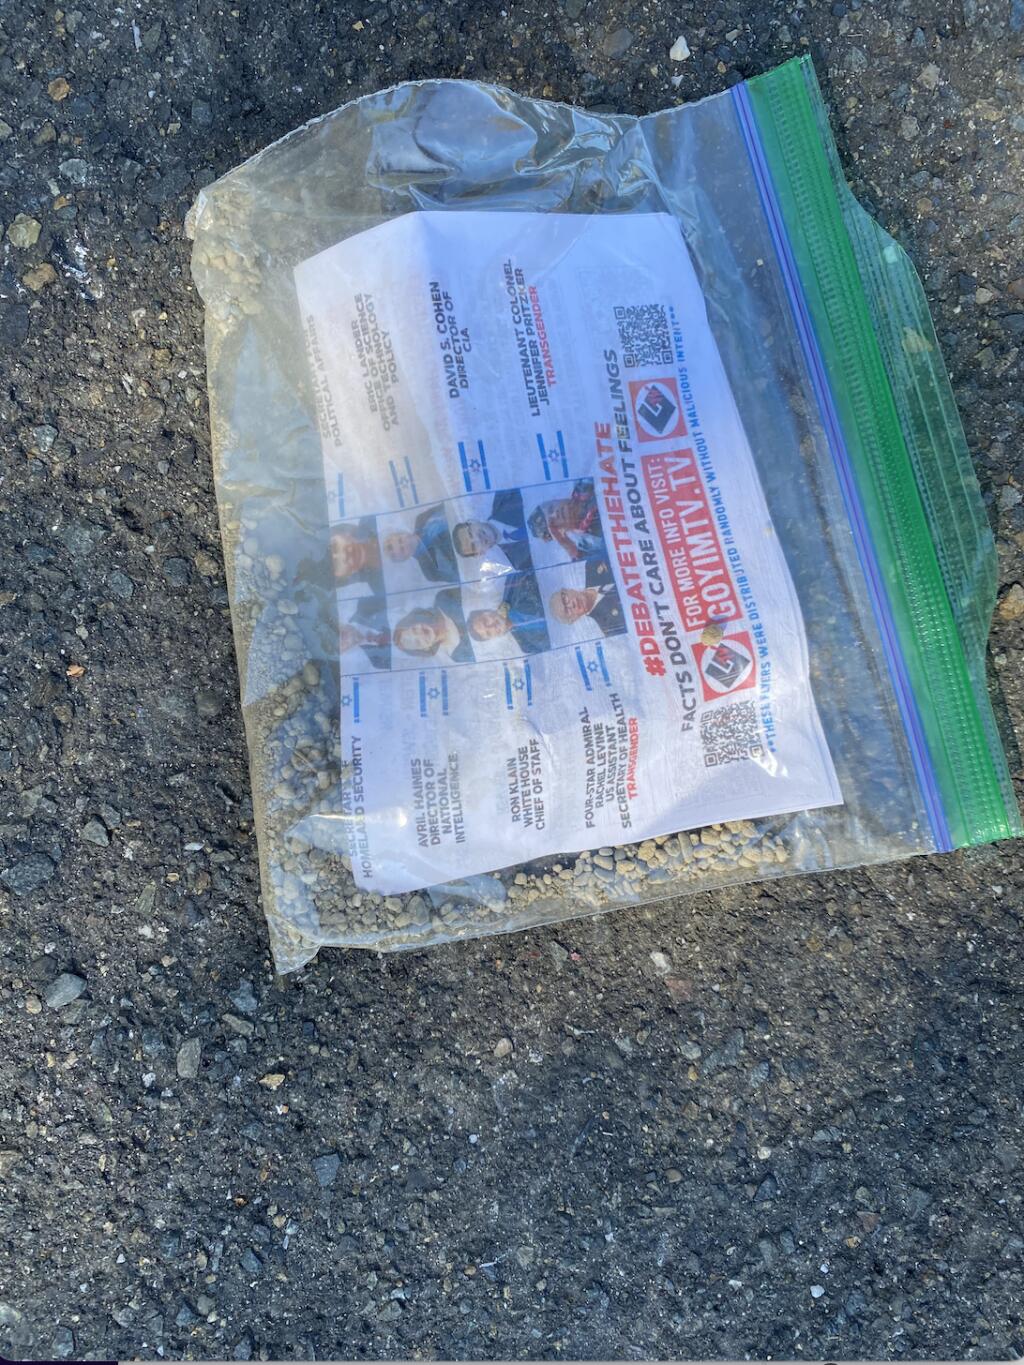 Plastic bags filled with antisemitic flyers and gravel were found on driveways in east Santa Rosa Friday morning. (Santa Rosa Police Department)